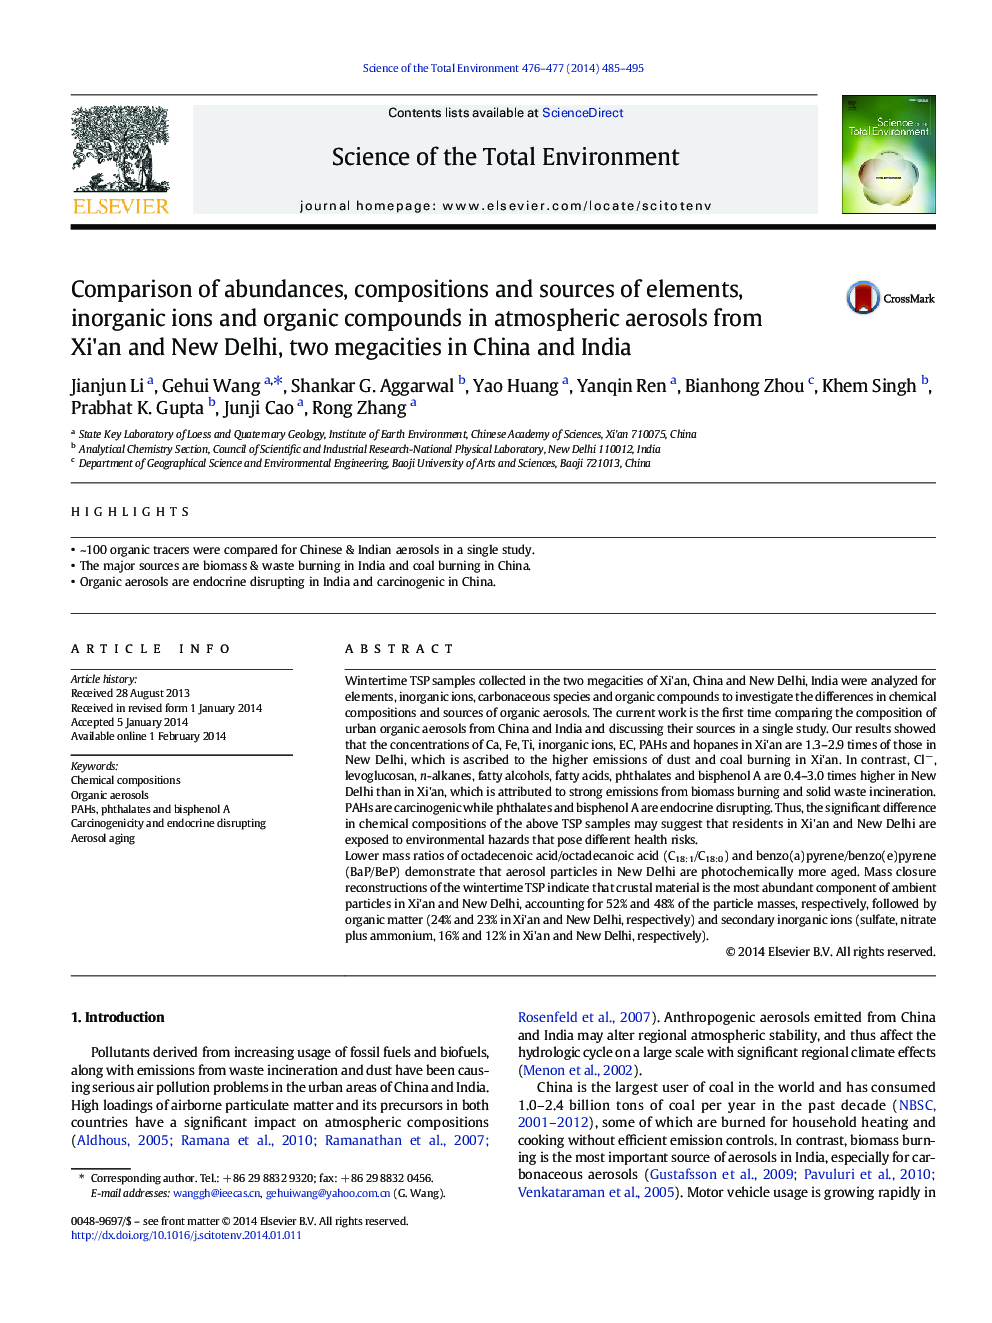 Comparison of abundances, compositions and sources of elements, inorganic ions and organic compounds in atmospheric aerosols from Xi'an and New Delhi, two megacities in China and India